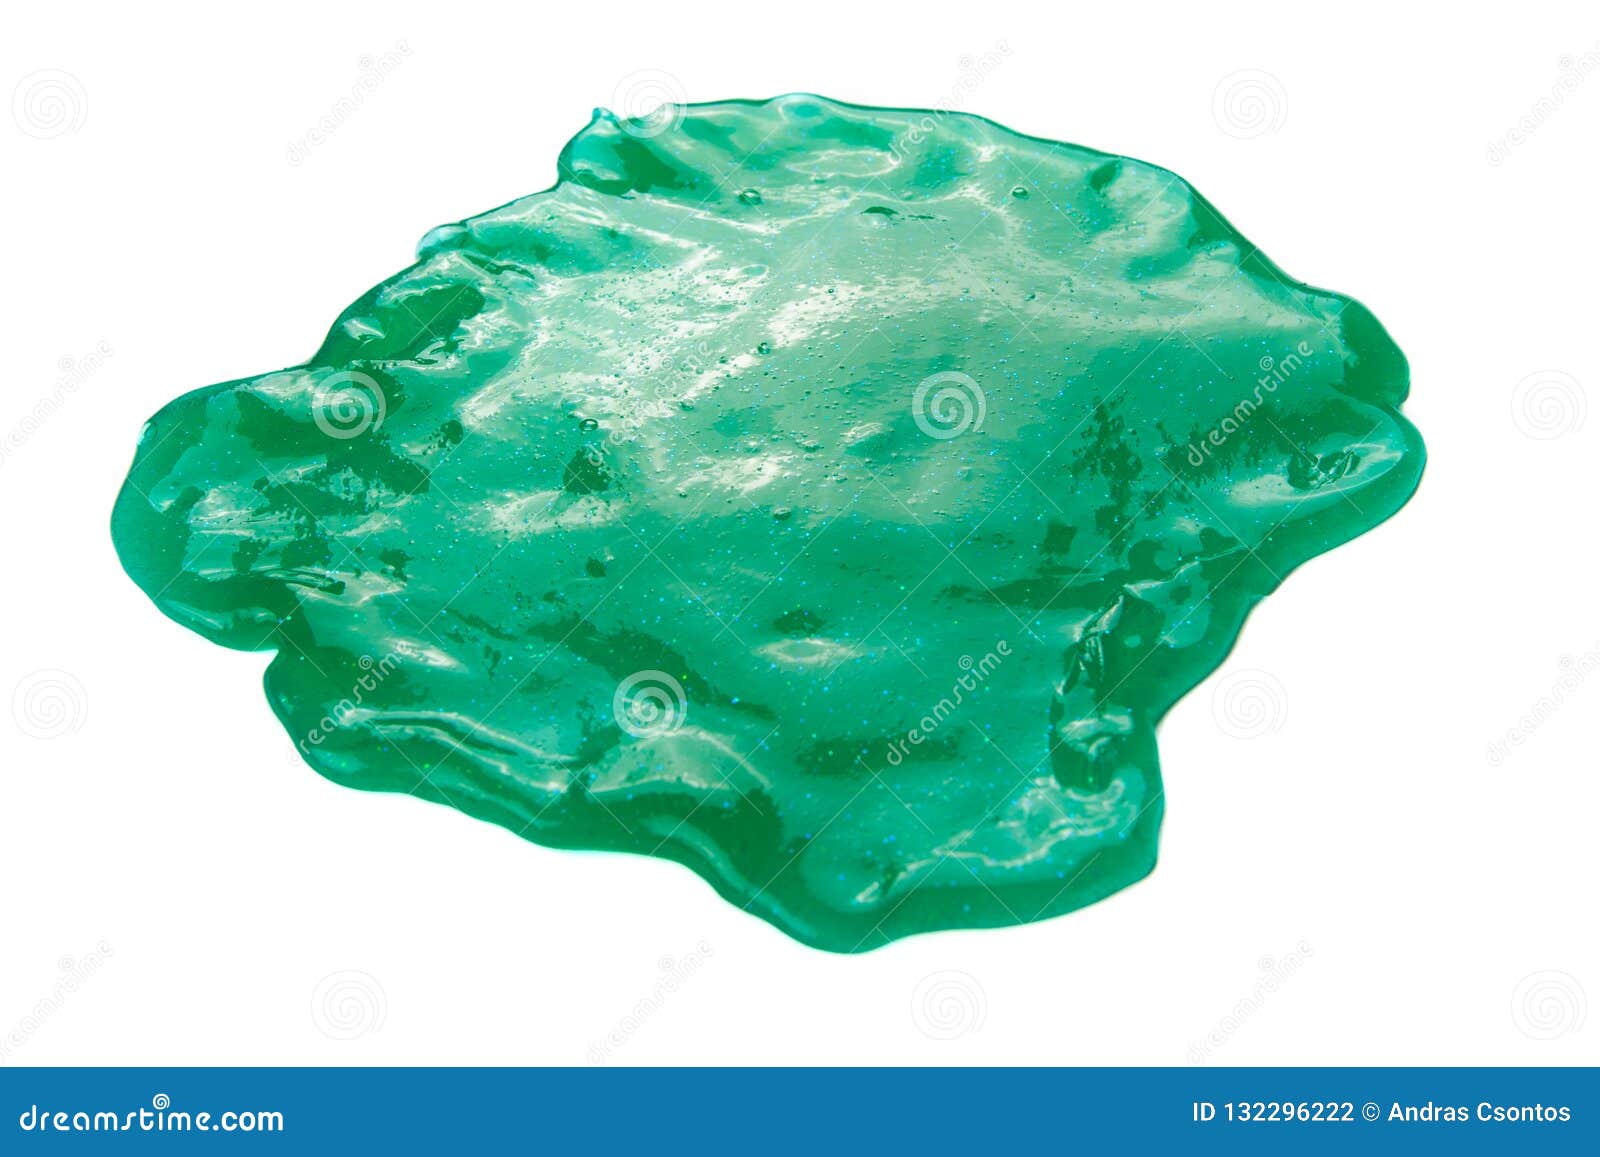 6,216 Blob Slime Royalty-Free Images, Stock Photos & Pictures